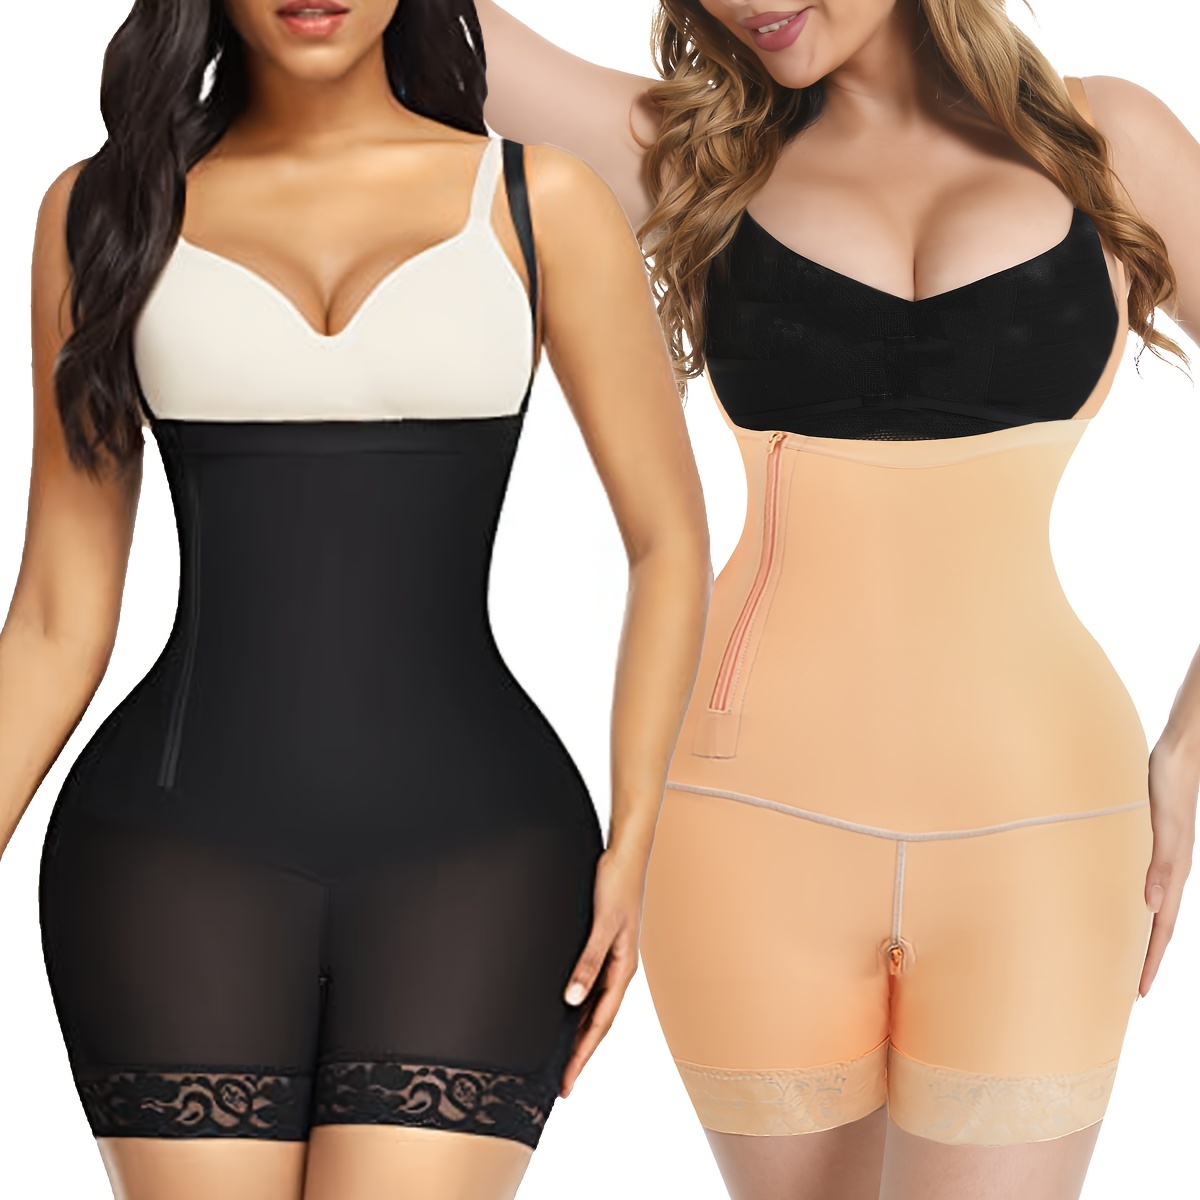 Waist Trainer For Women Lower Belly Fat,Body Shaper India